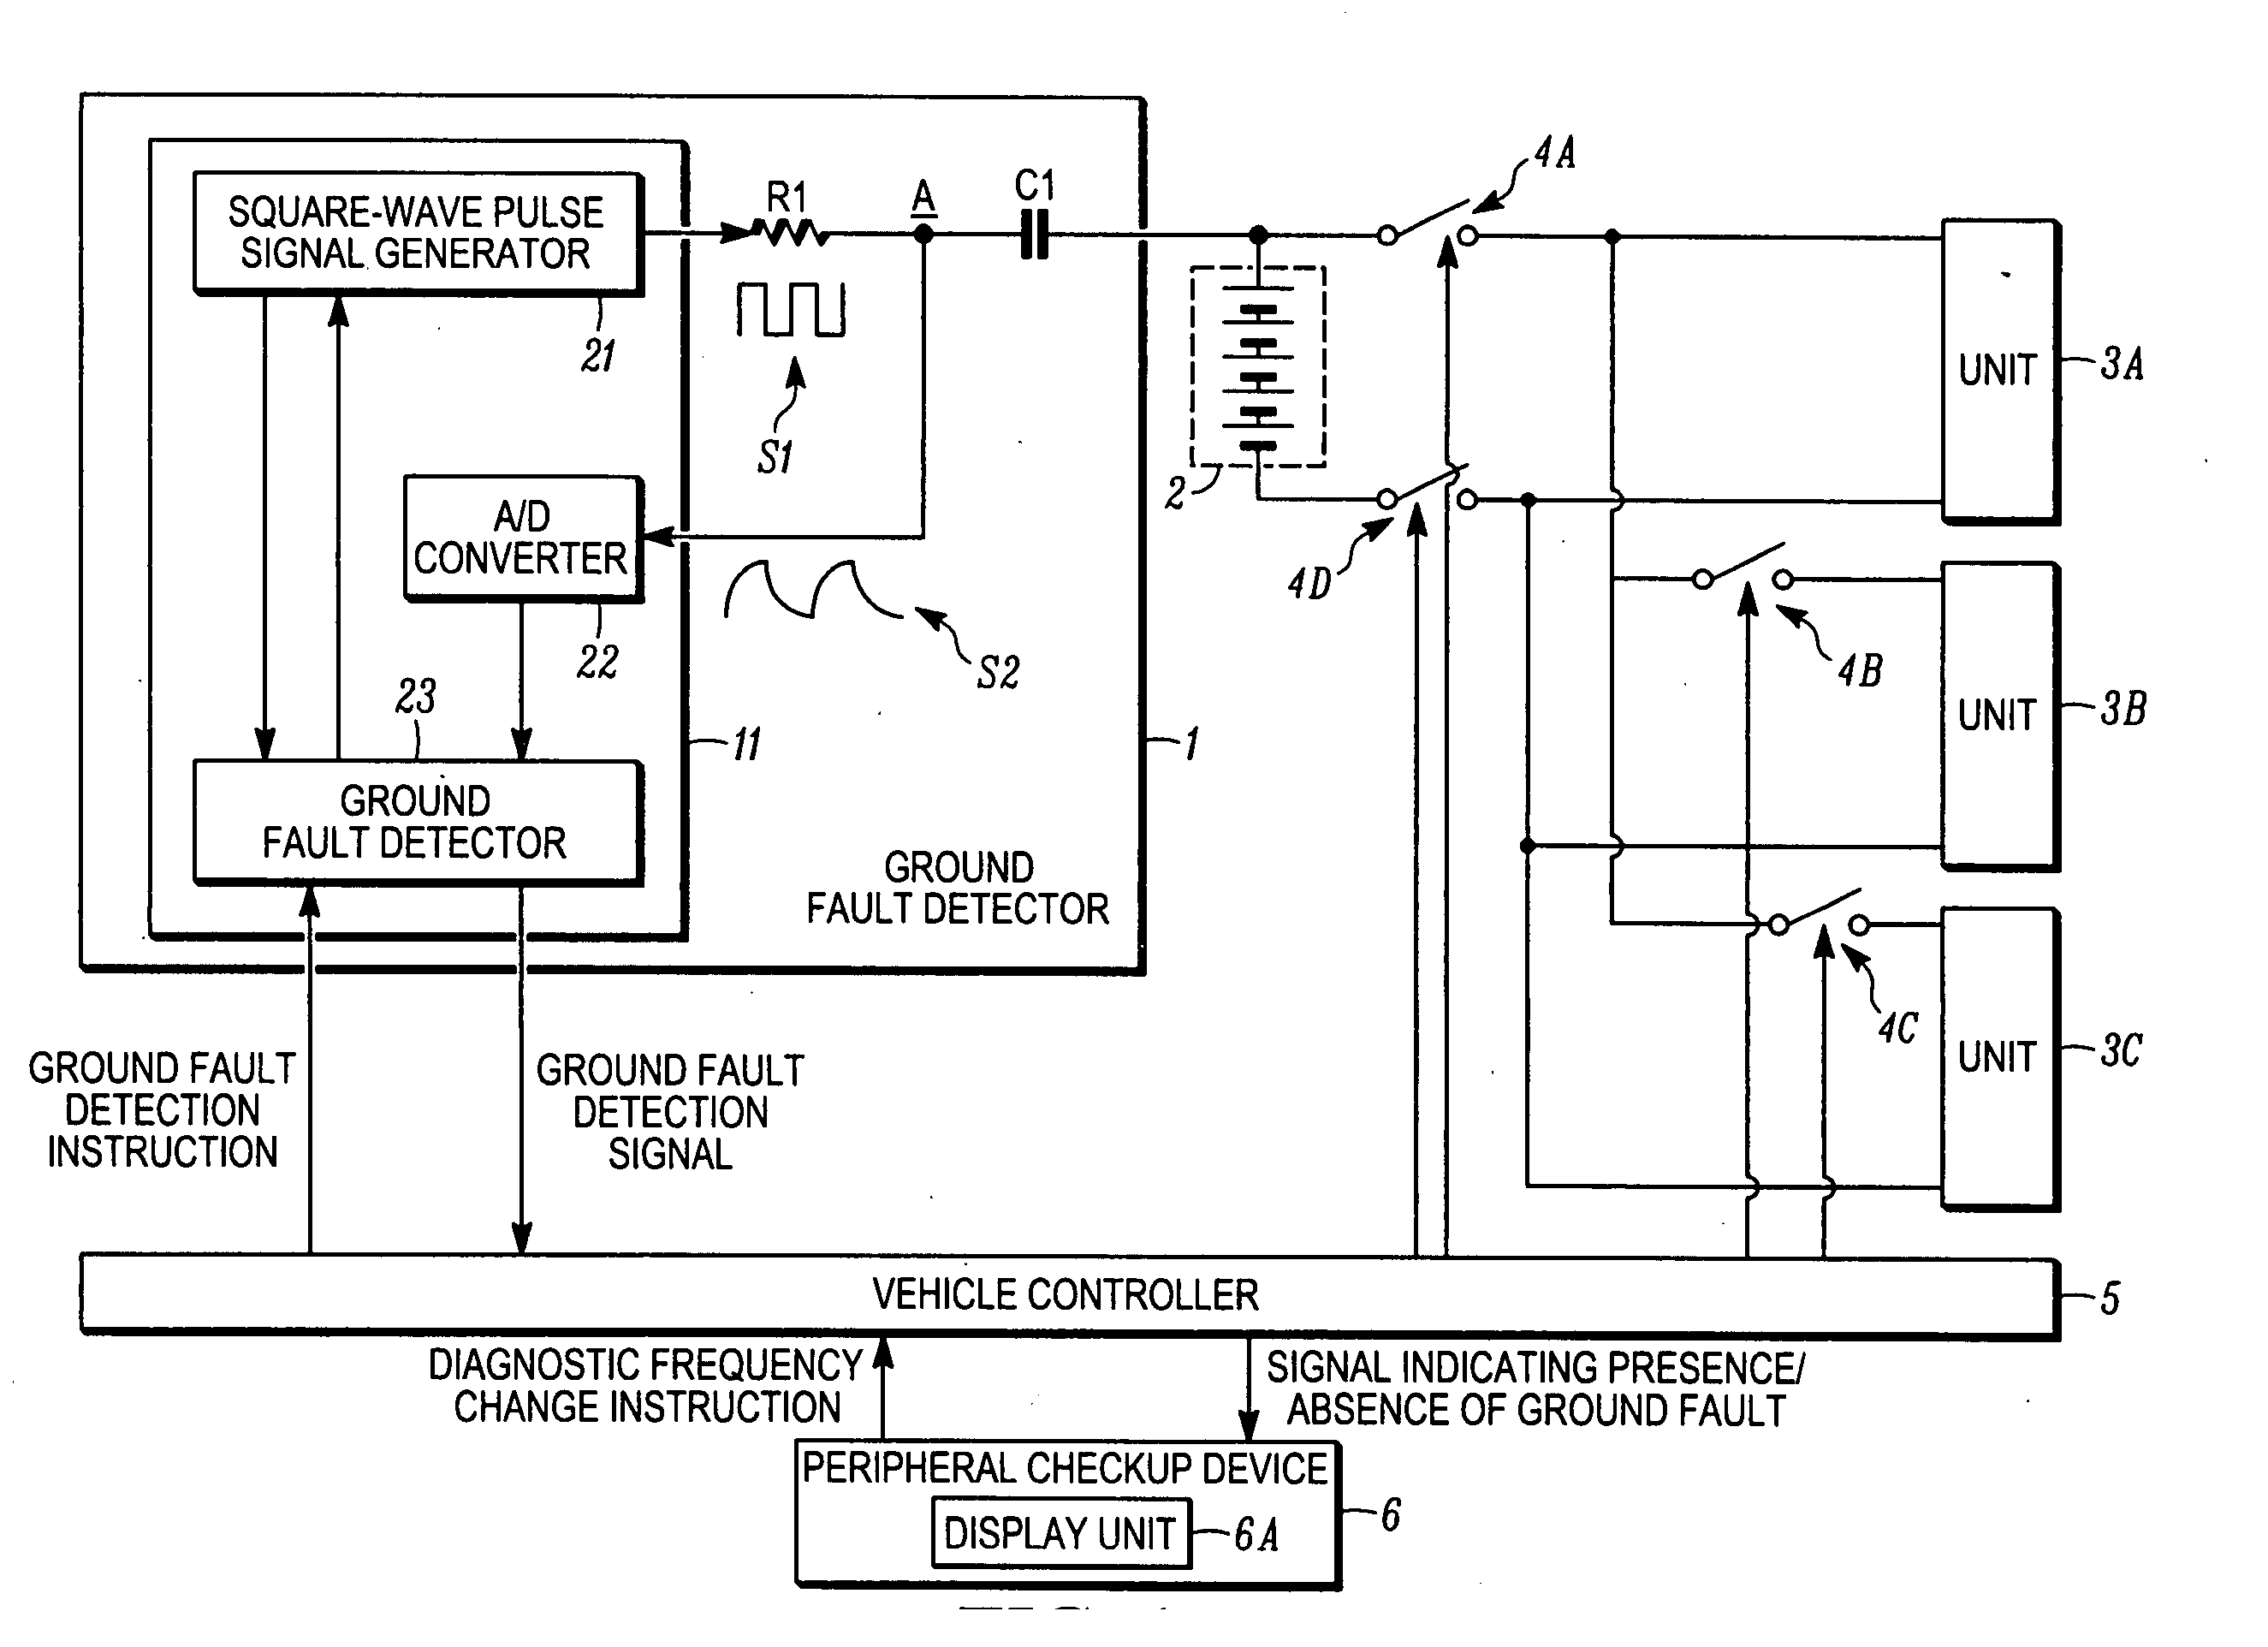 Ground fault detector for vehicle